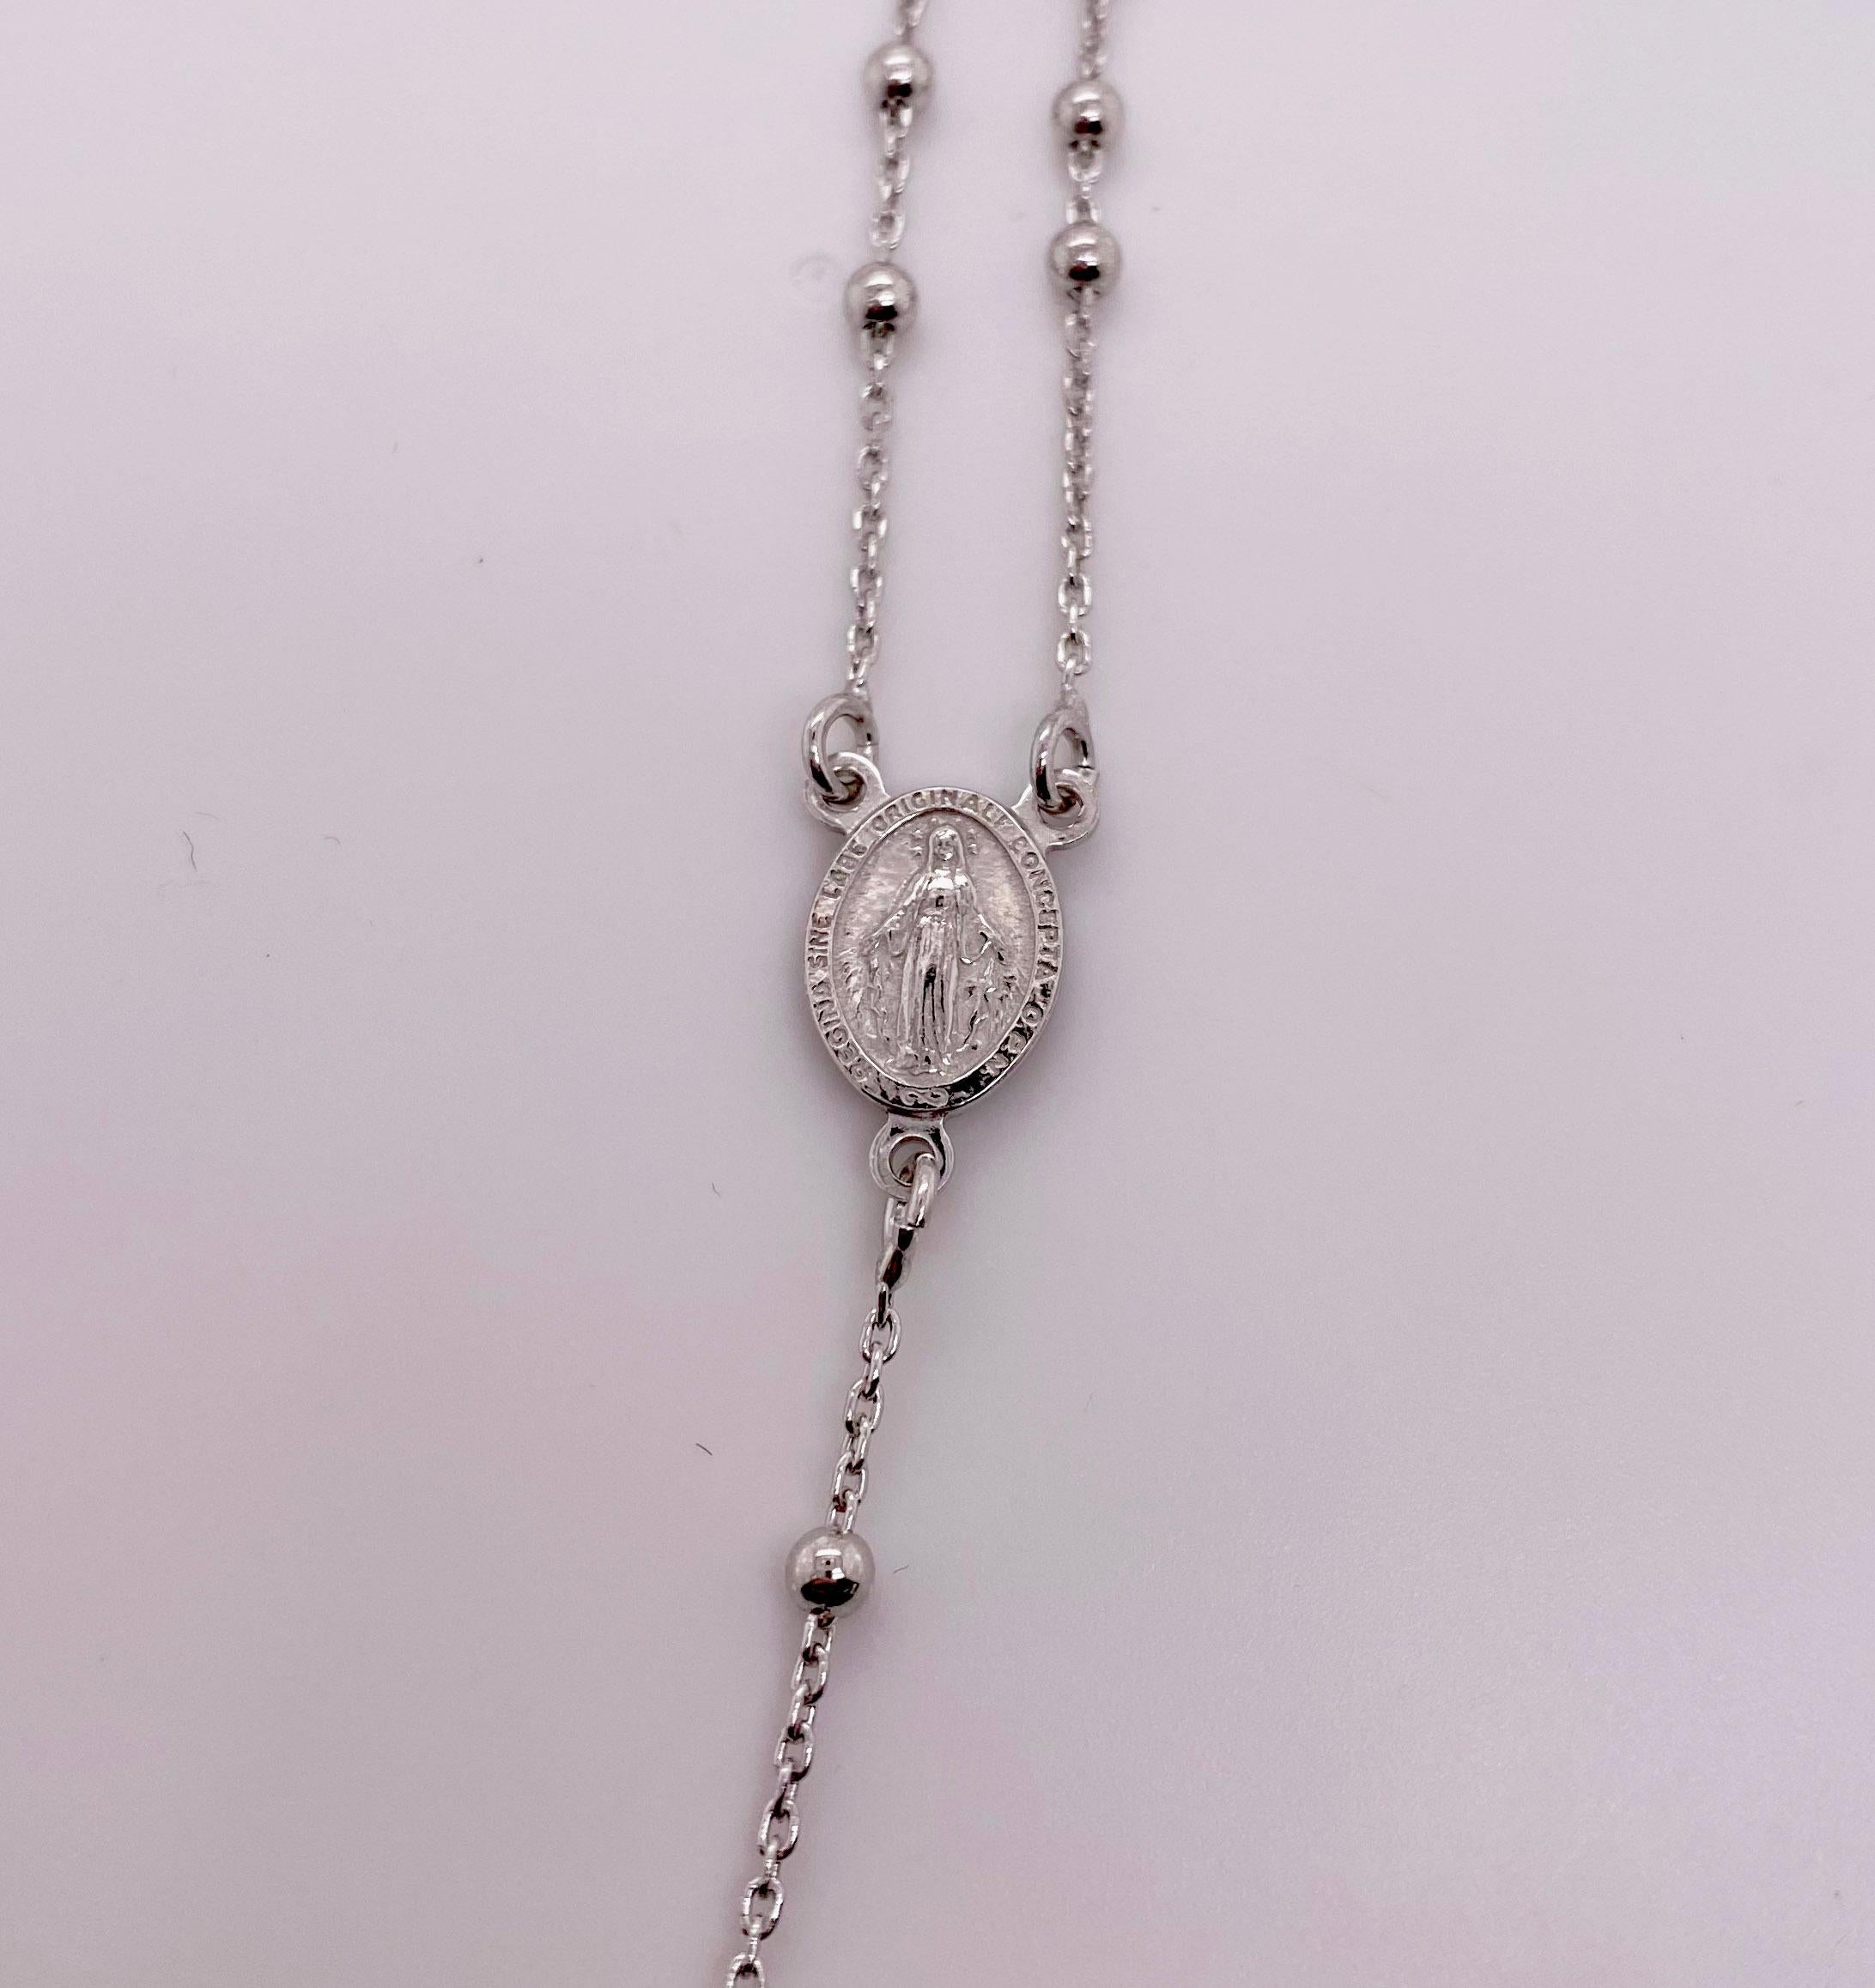 Catholic Rosary Necklace in Sterling Silver (92.5% pure silver). This necklace is your perfect prayer and it can be worn around your neck. There is a gorgeous cross at the end of the necklace.
The details for this beautiful necklace are listed